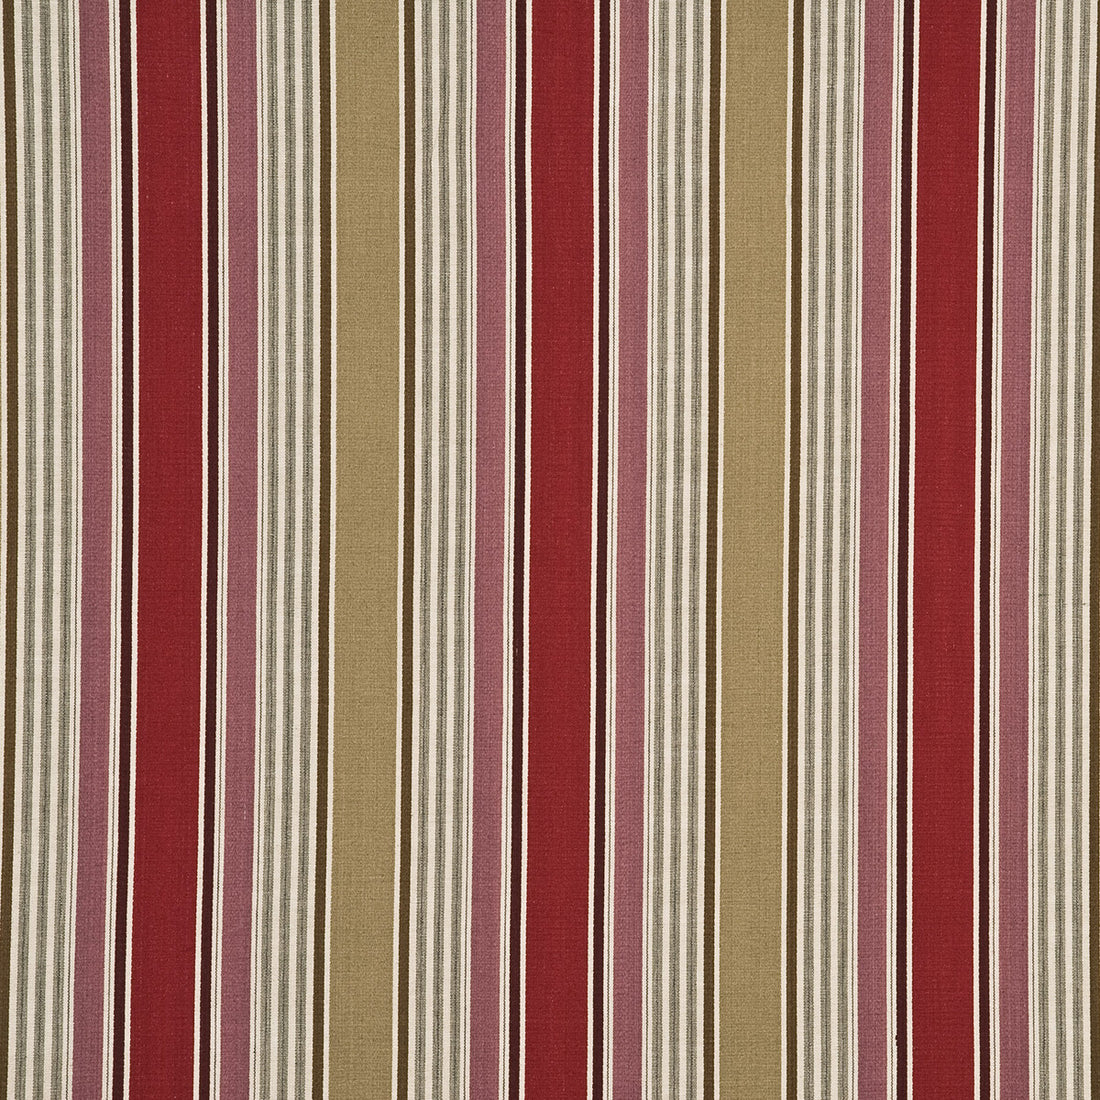 Arley Stripe fabric in red/camel color - pattern BF10401.4.0 - by G P &amp; J Baker in the Holcott collection